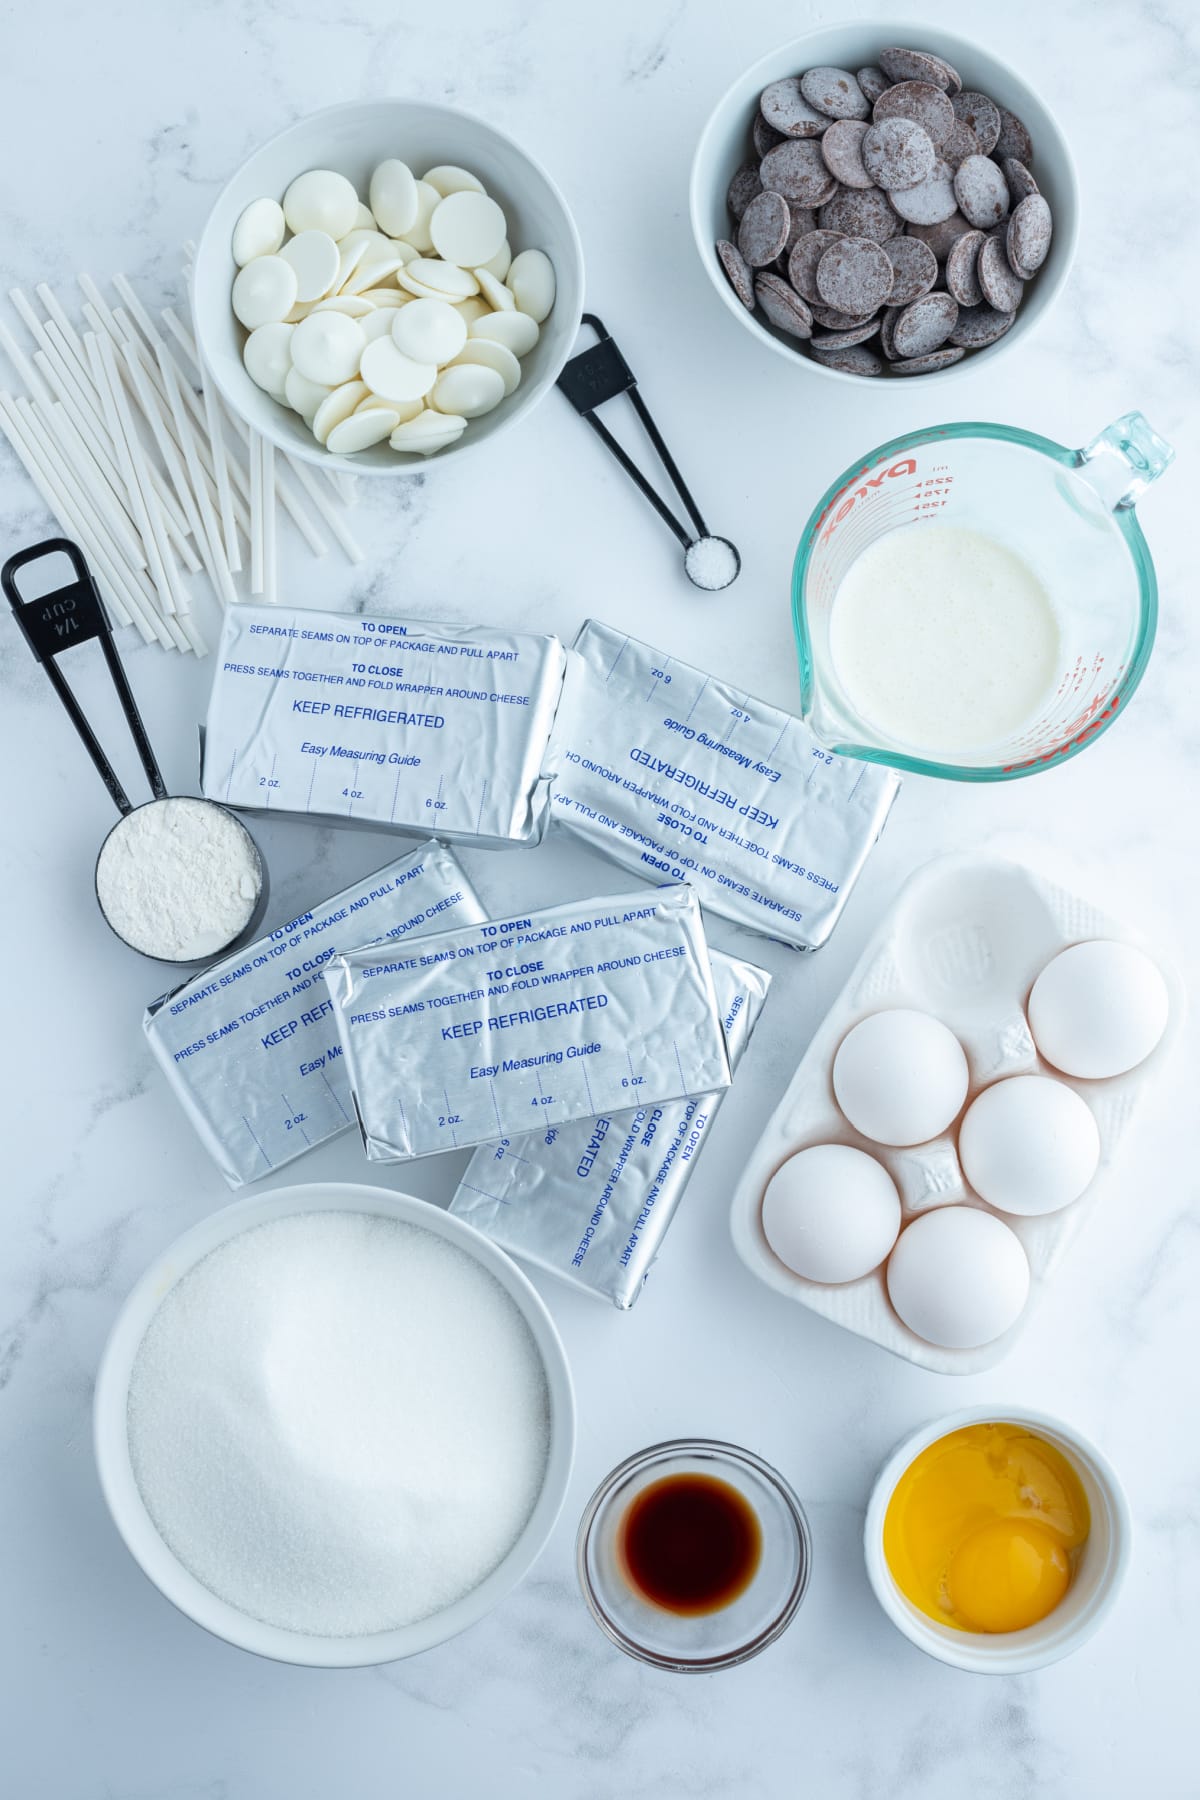 ingredients displayed for making cheesecake pops